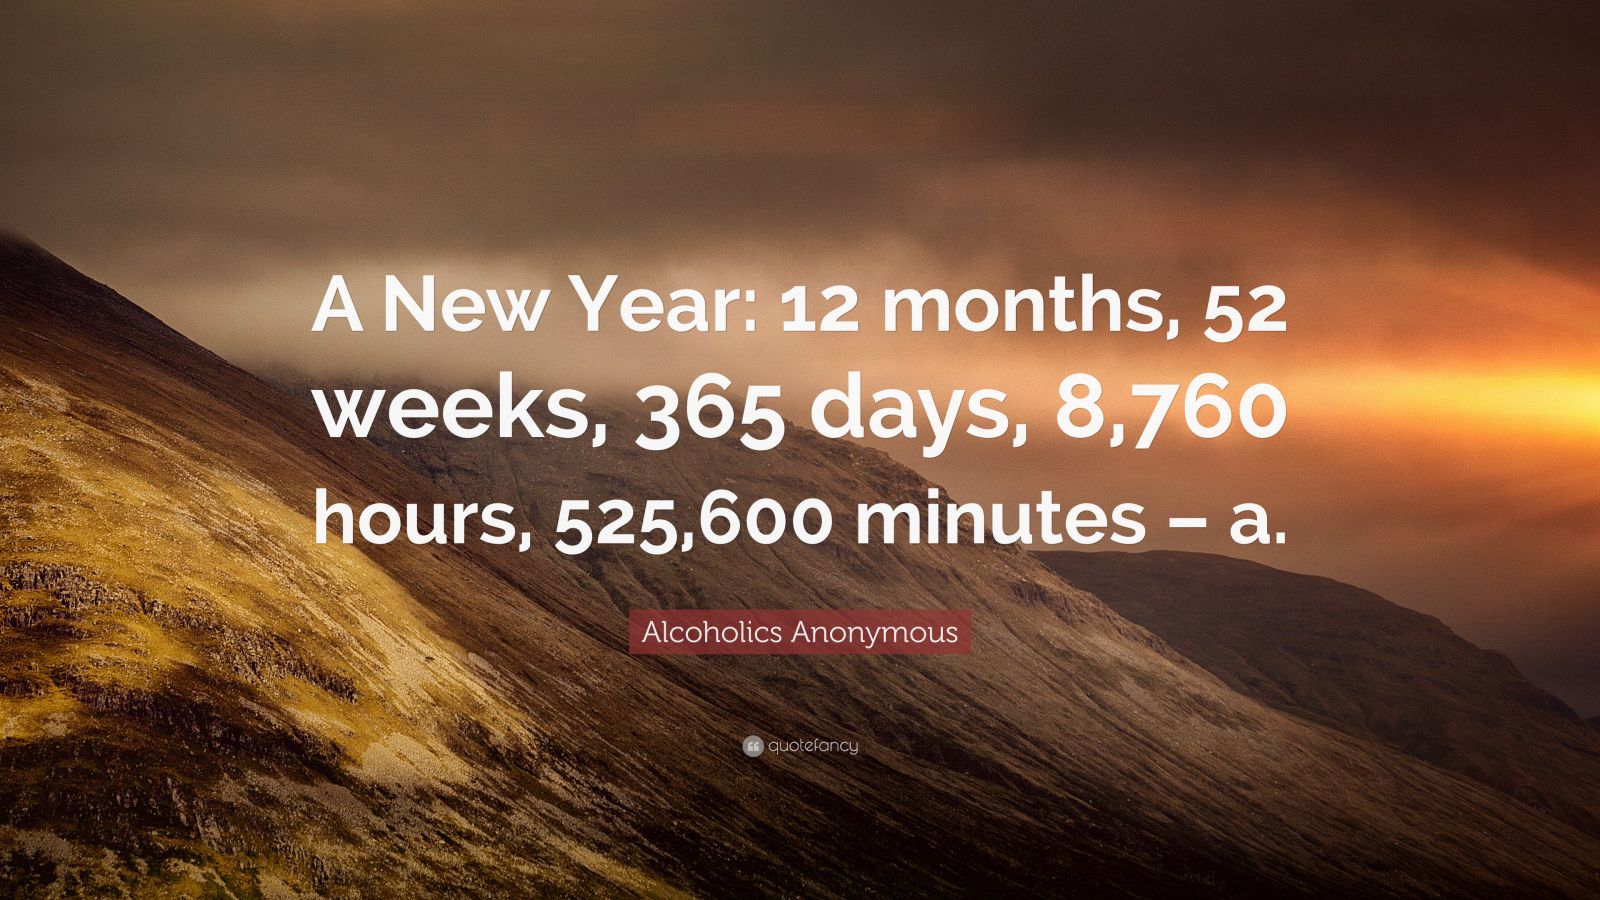 Alcoholics Anonymous Quote A New Year 12 Months 52 Weeks 365 Days 8 760 Hours 525 600 Minutes A